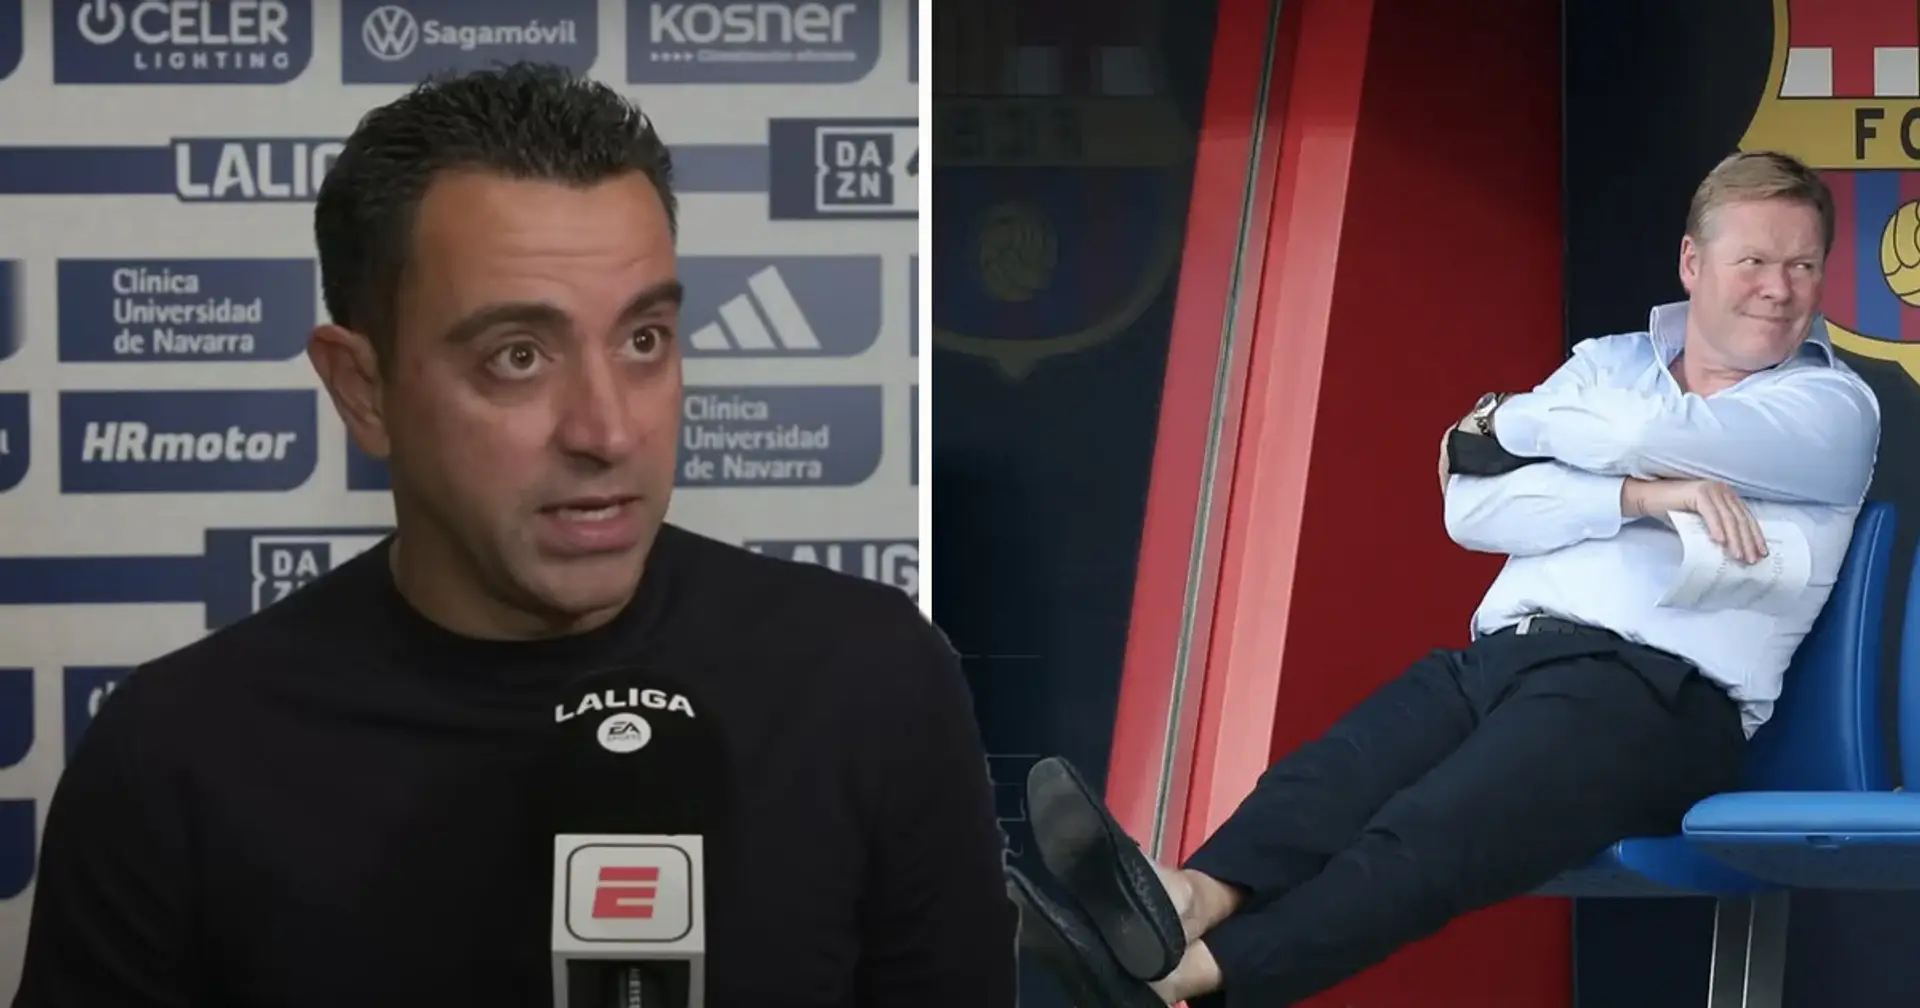 'Will be sacked in June': Culers compare Xavi to Koeman amid contract renewal news